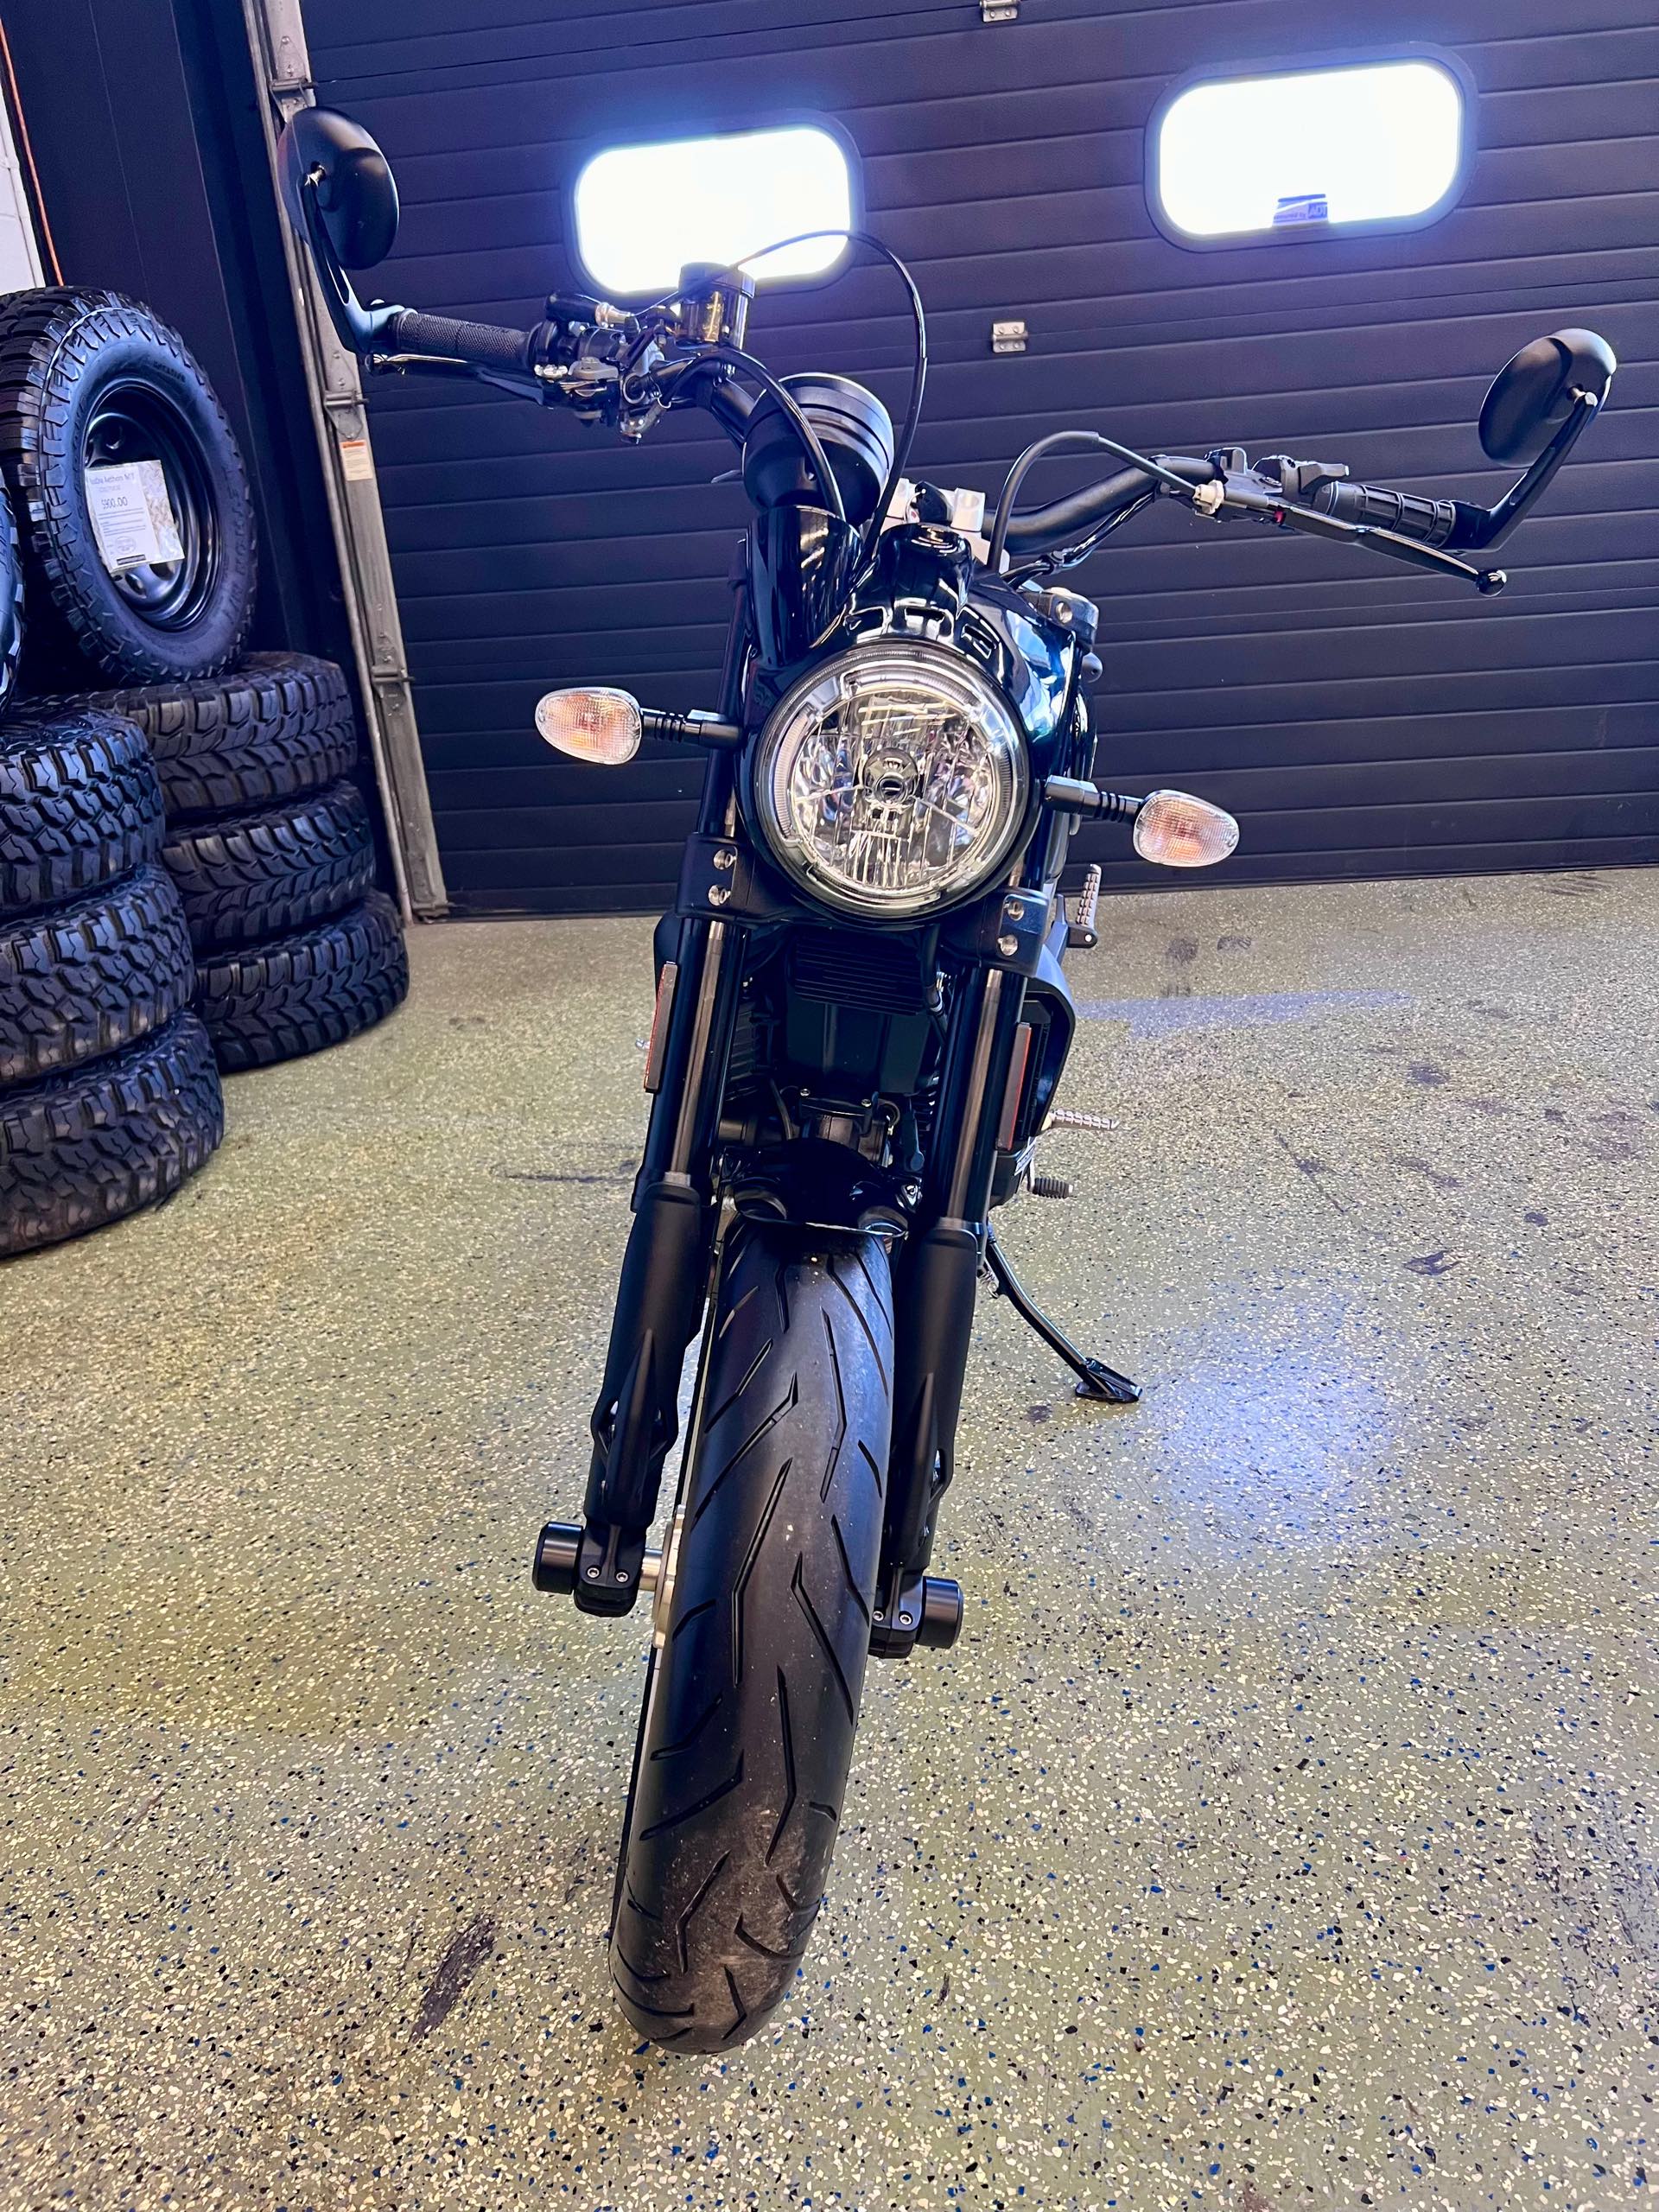 2017 Ducati Scrambler Cafe Racer at Thornton's Motorcycle Sales, Madison, IN